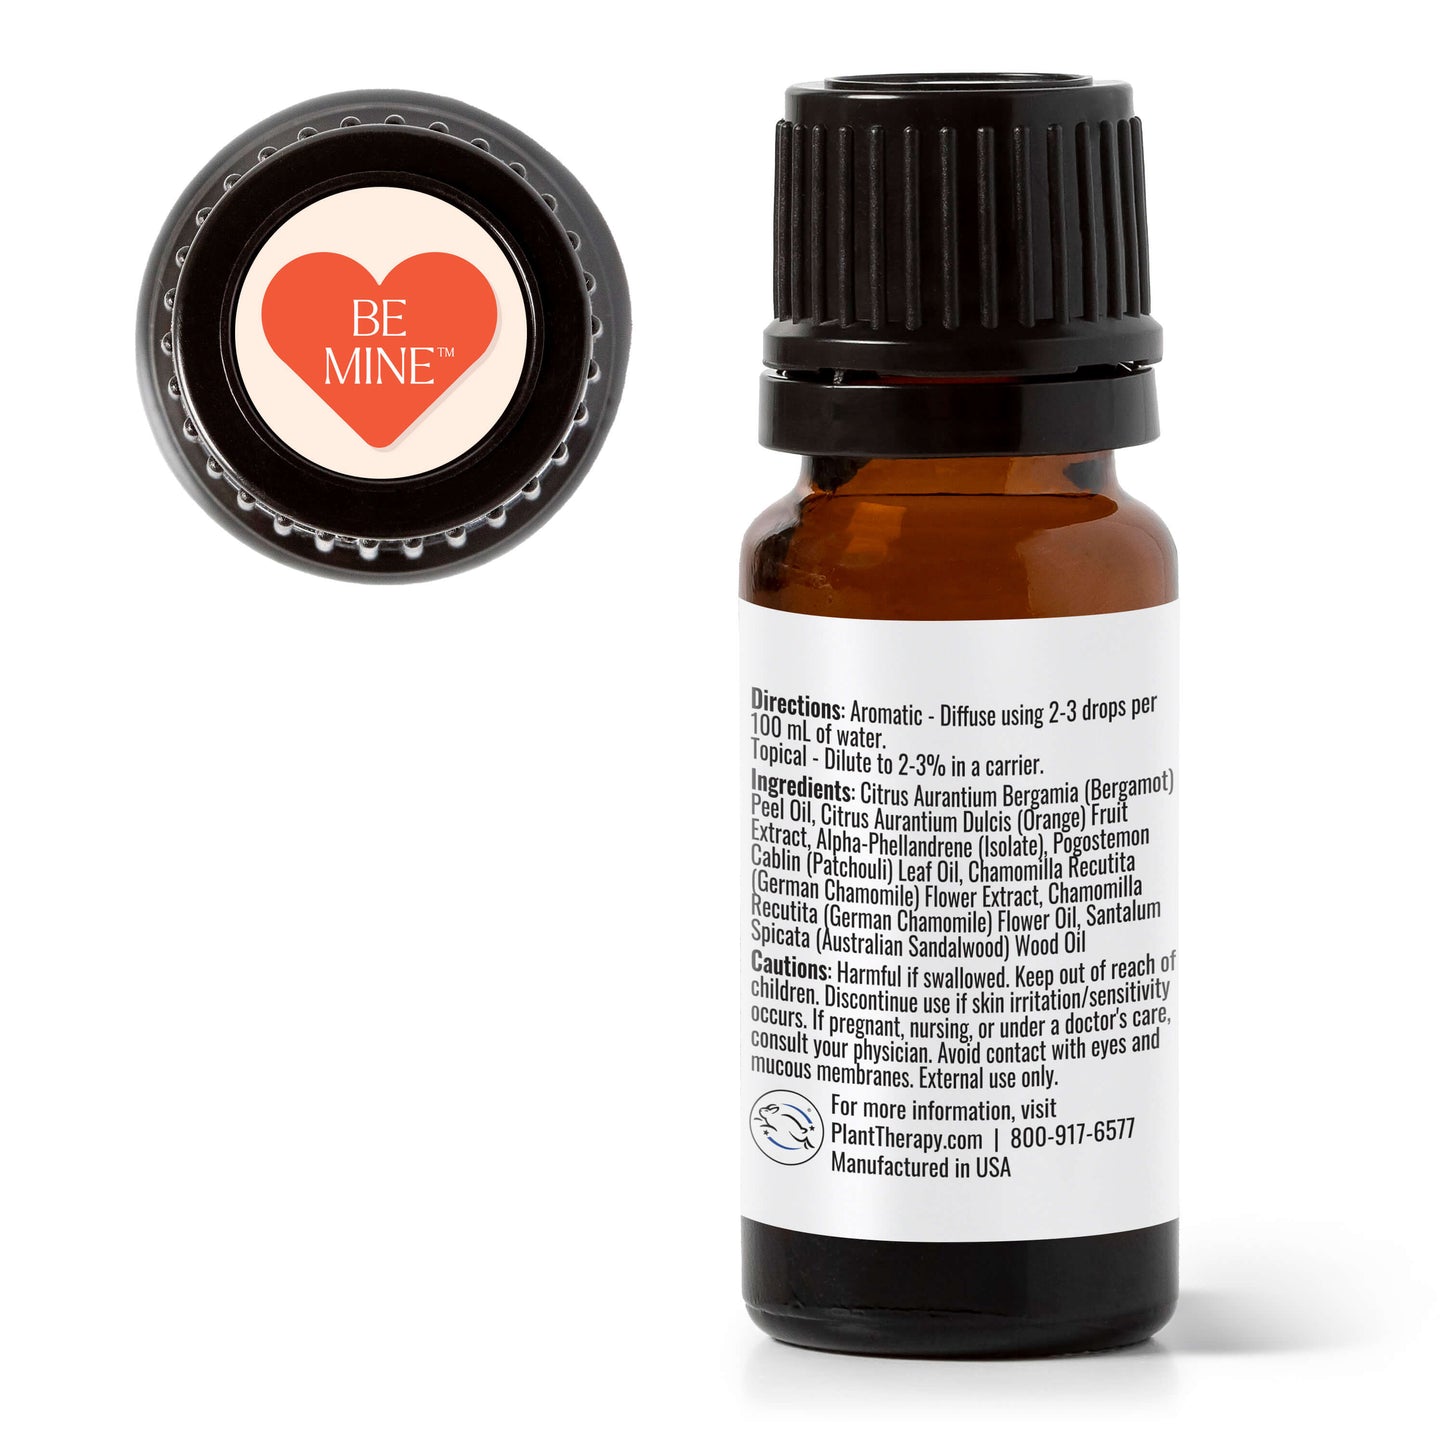 Be Mine Essential Oil Blend